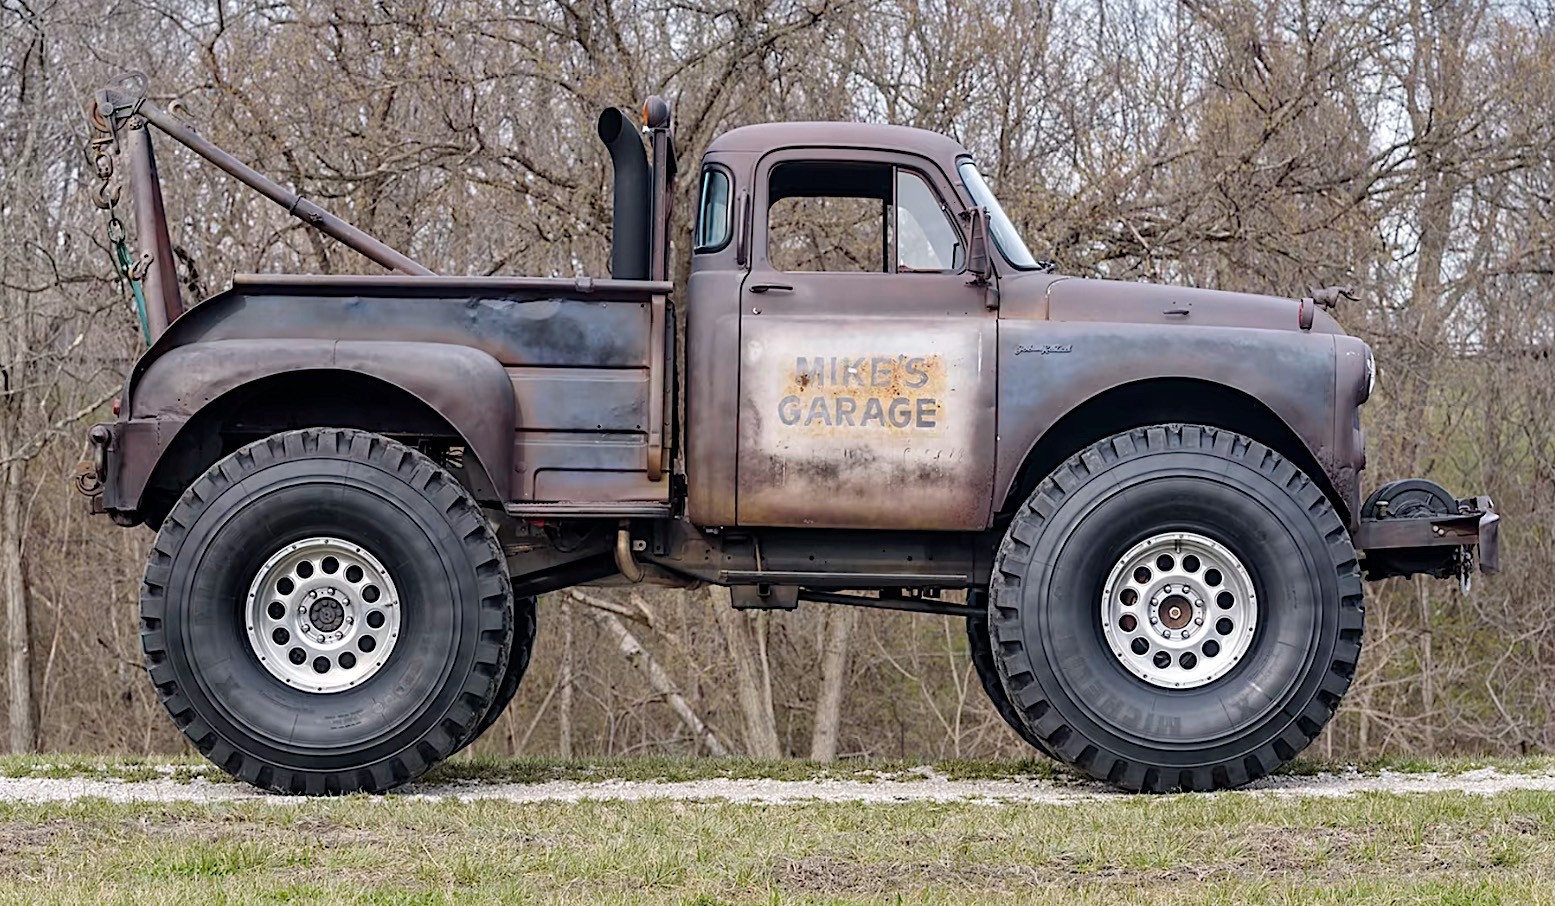 The Impact of 52-Inch Tires on a 1955 Dodge Truck